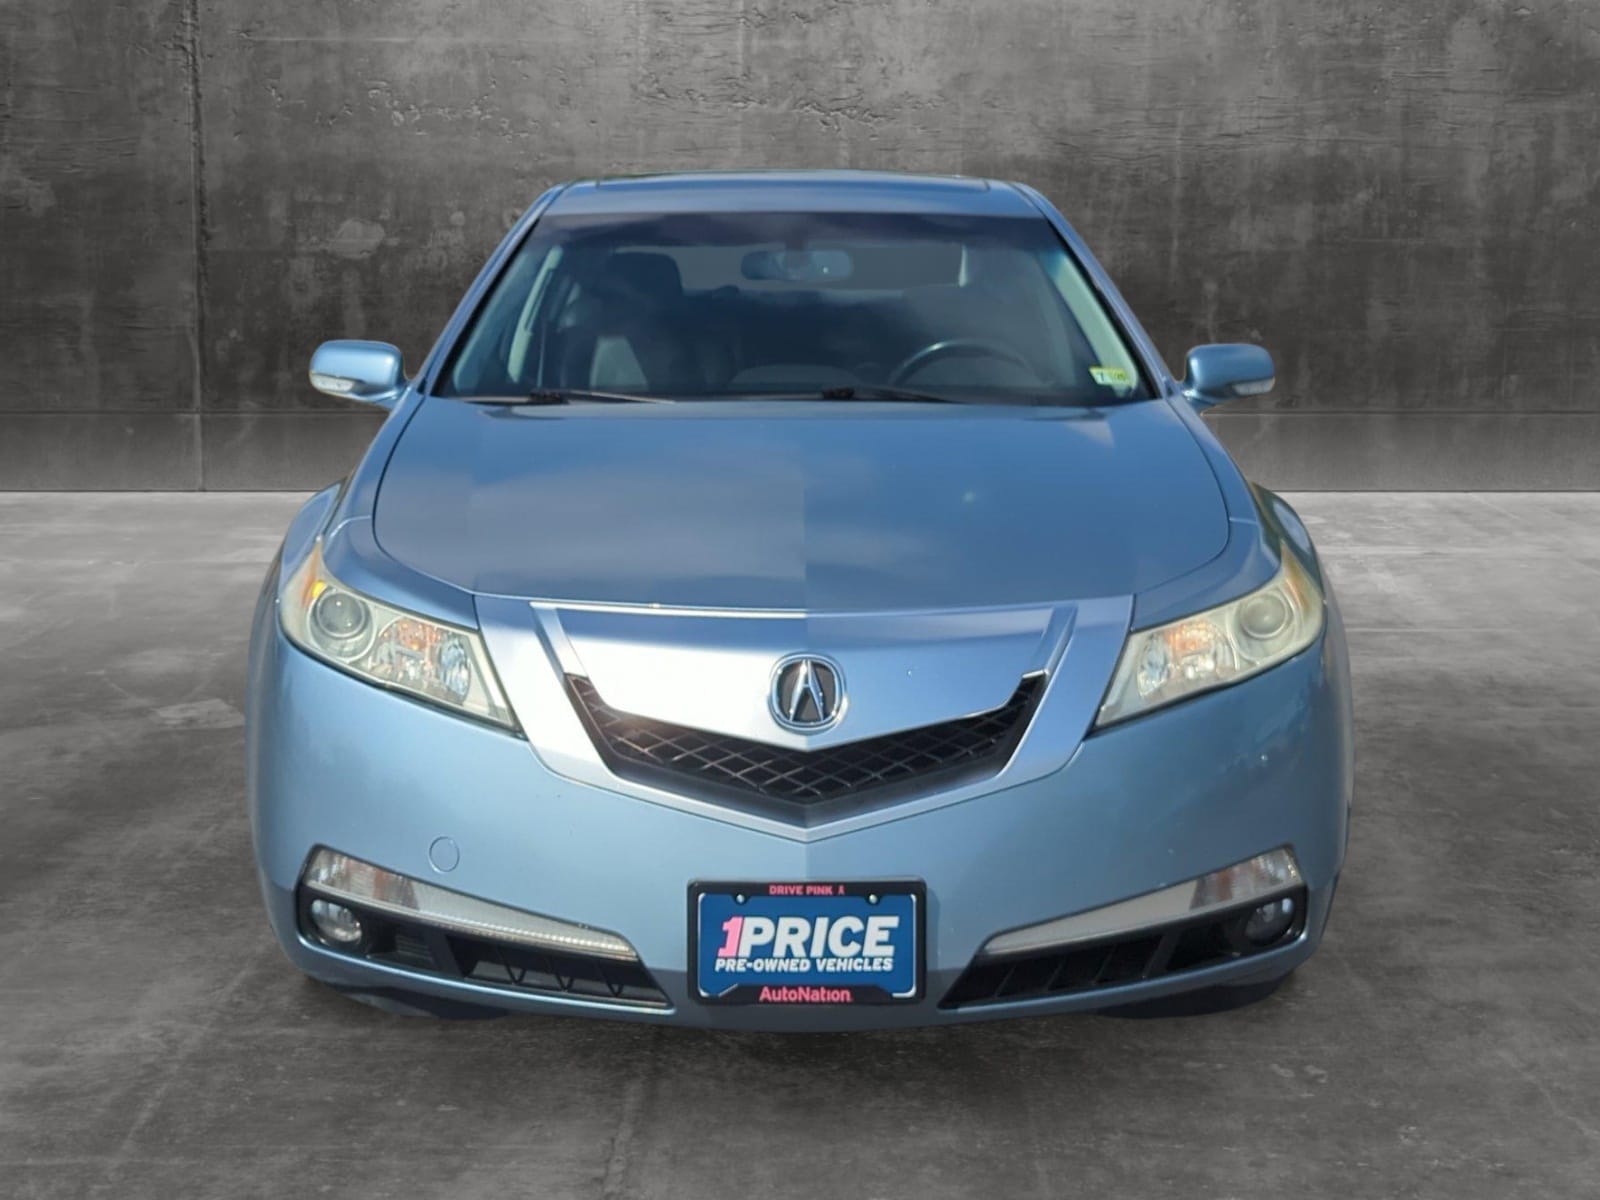 Used 2009 Acura TL Technology Package with VIN 19UUA86539A006710 for sale in Leesburg, VA